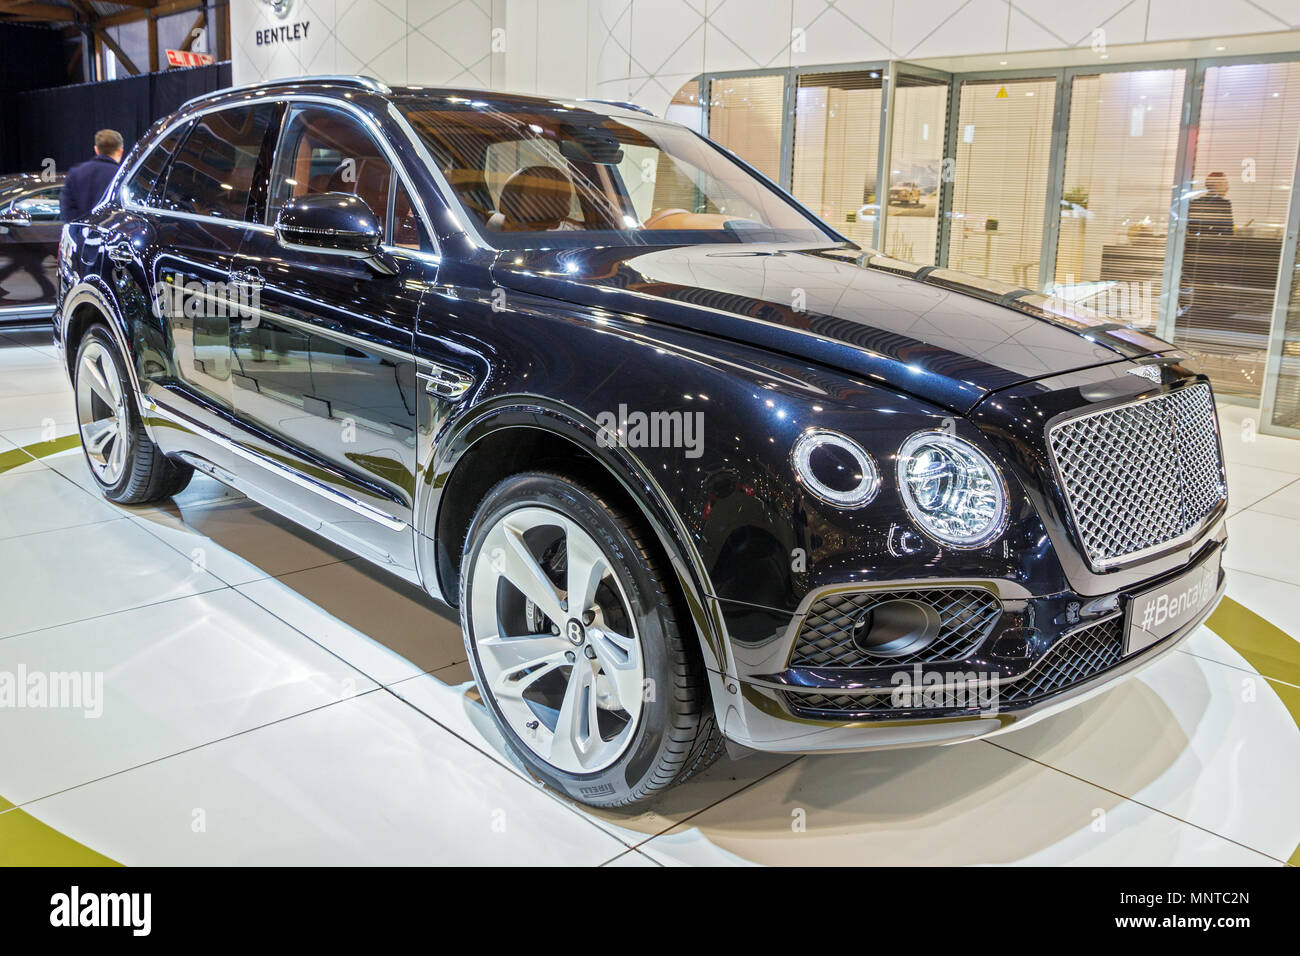 BRUSSELS - JAN 12, 2016: Bentley Bentayga exclusive SUV car showcased at the Brussels Motor Show. Stock Photo